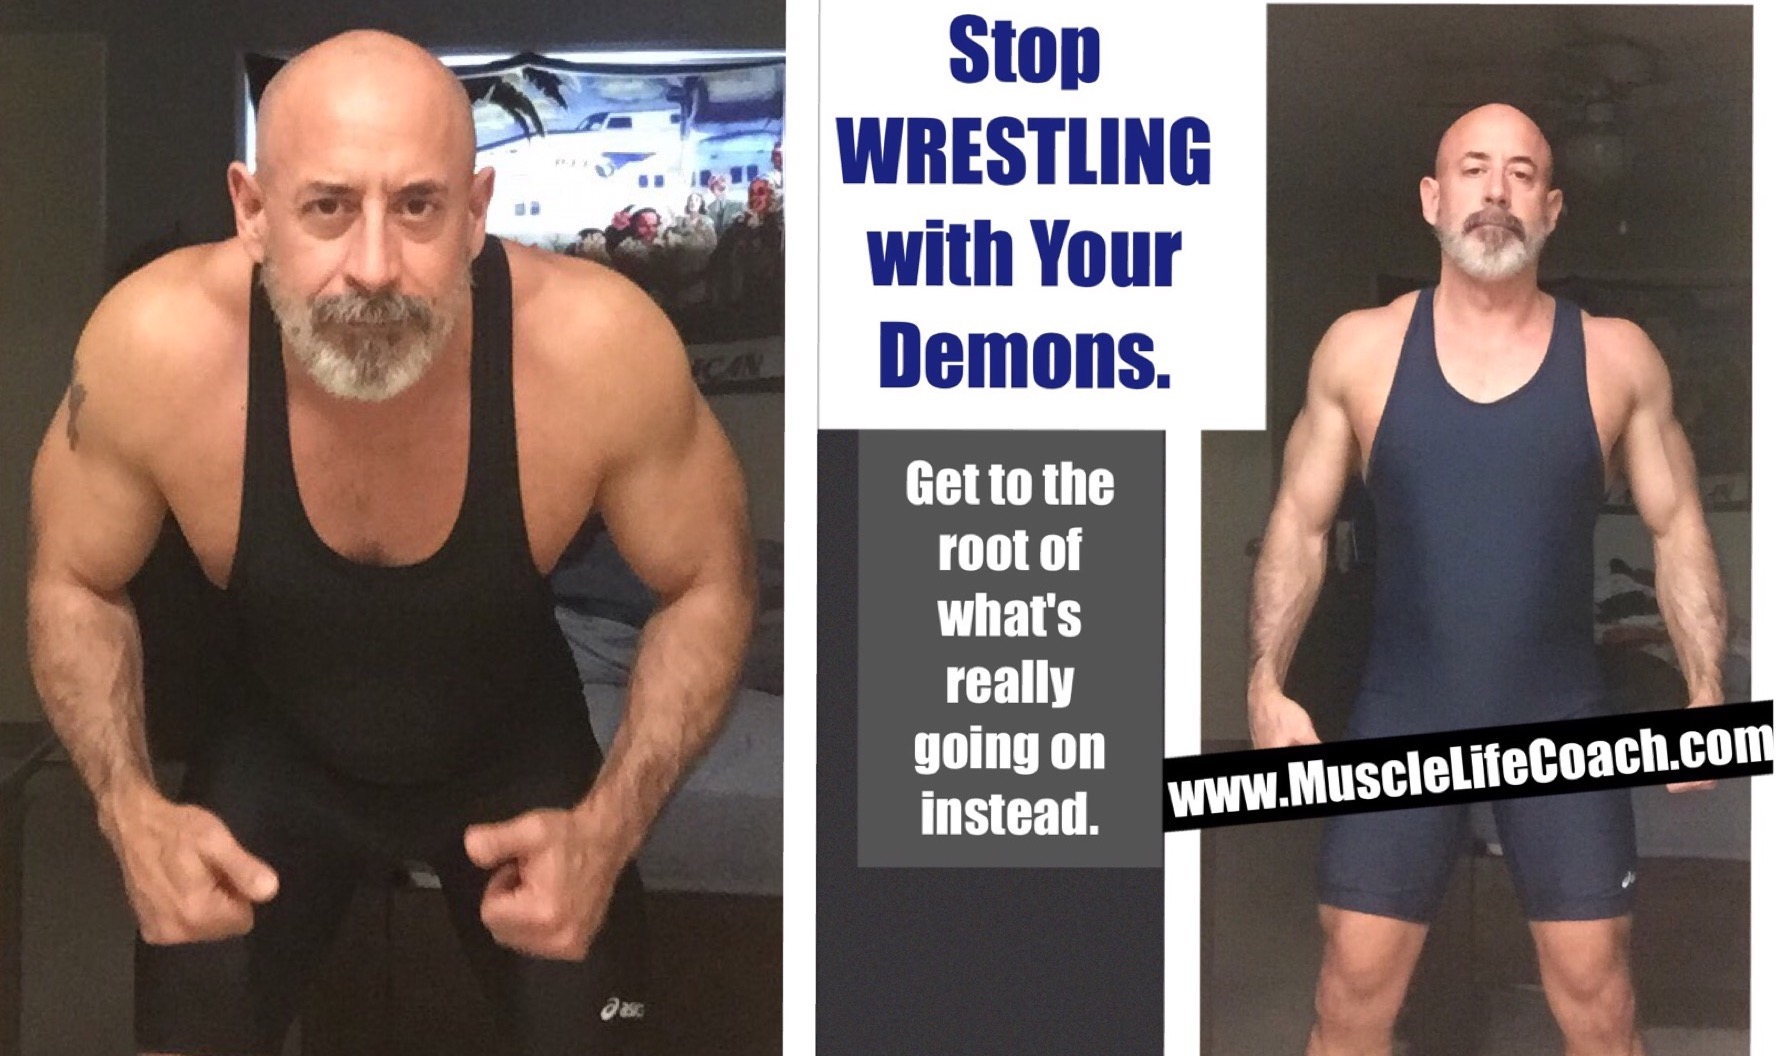 Changing Your Inner Game: “Stop Wrestling with Your Demons!”